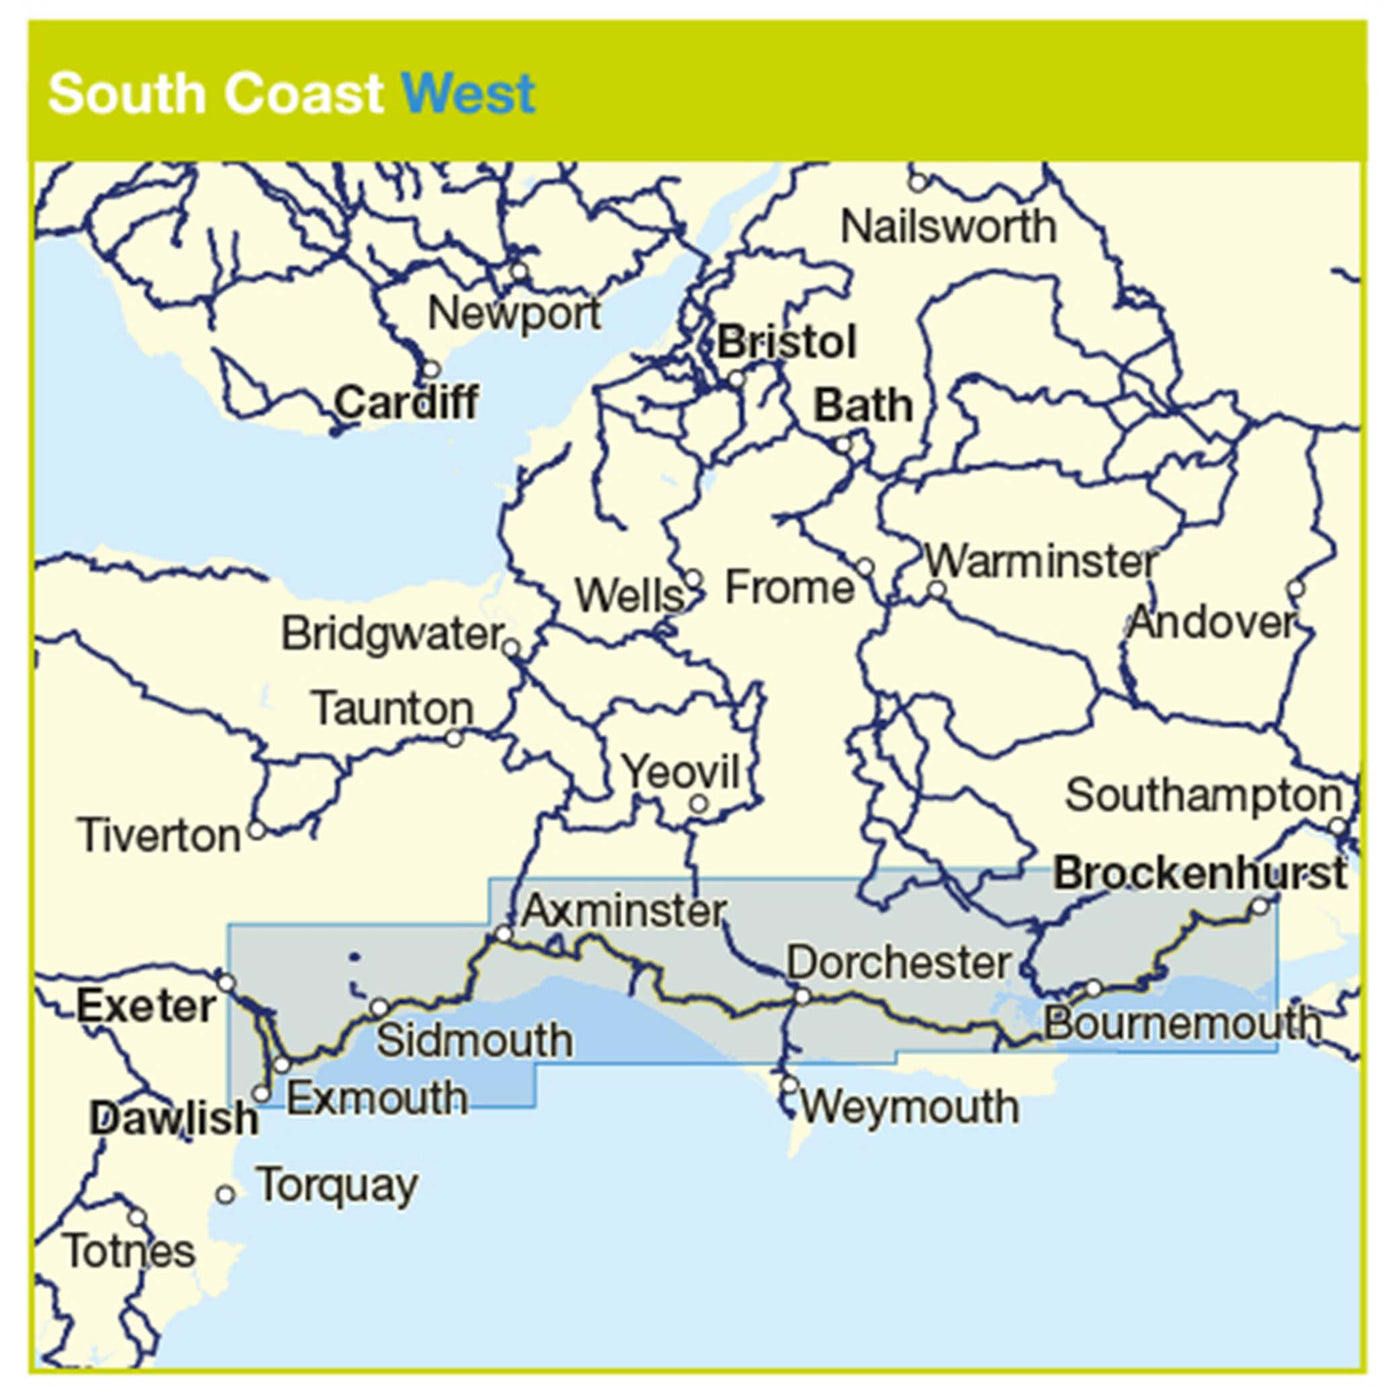 South Coast West cycle route coverage 